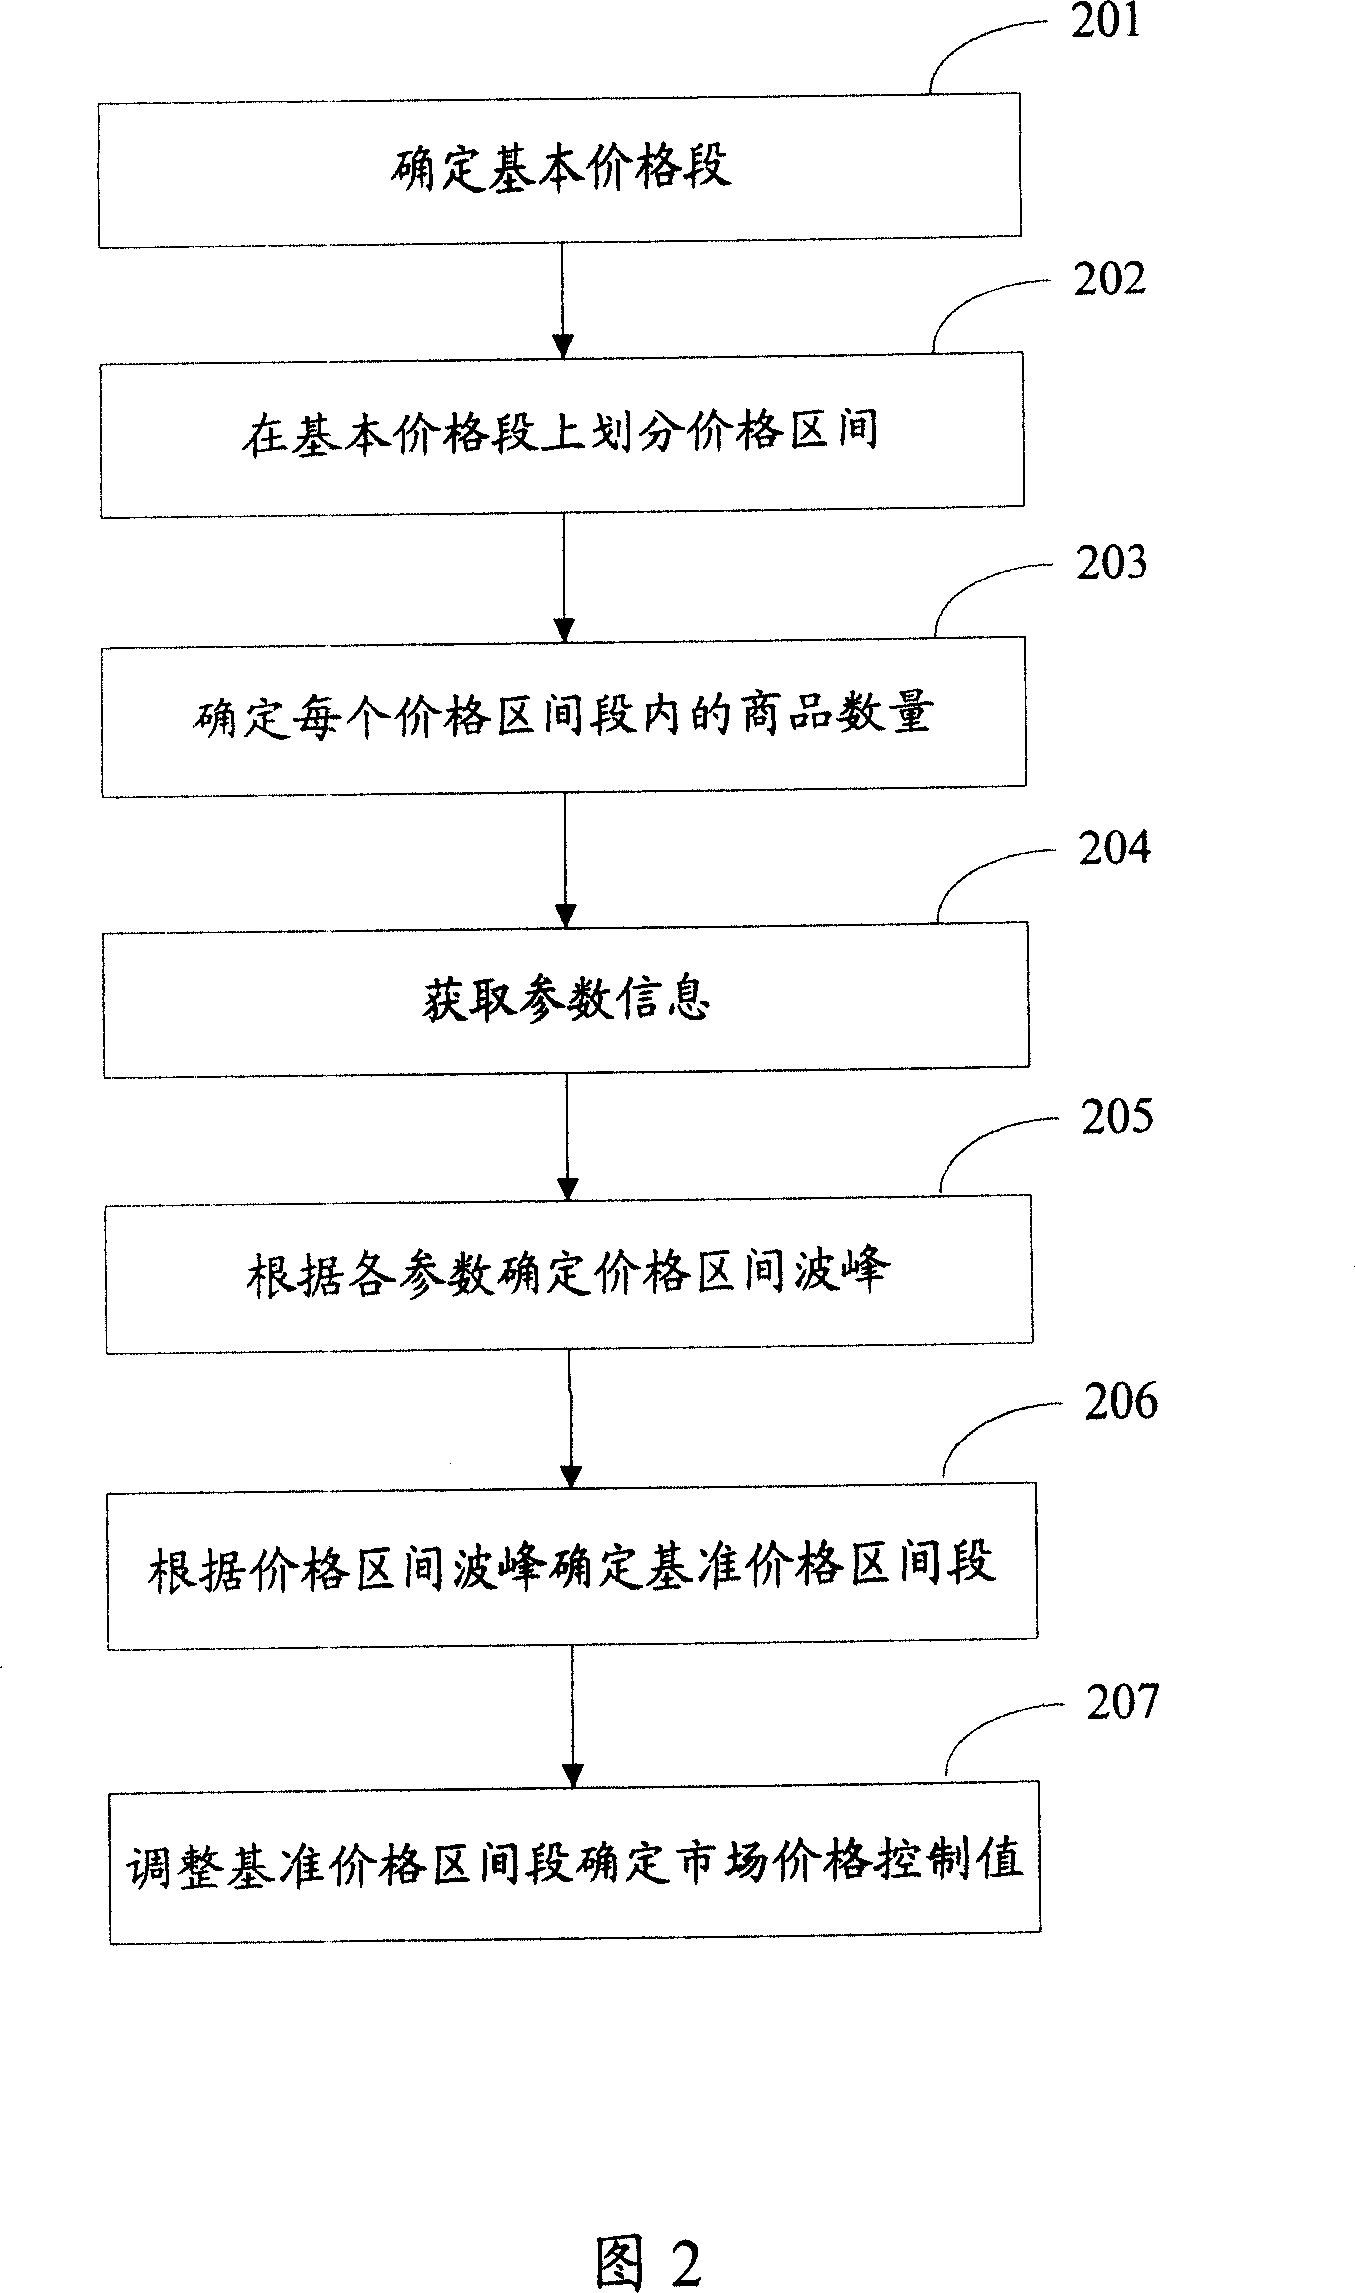 Method and system for filtering merchandise information